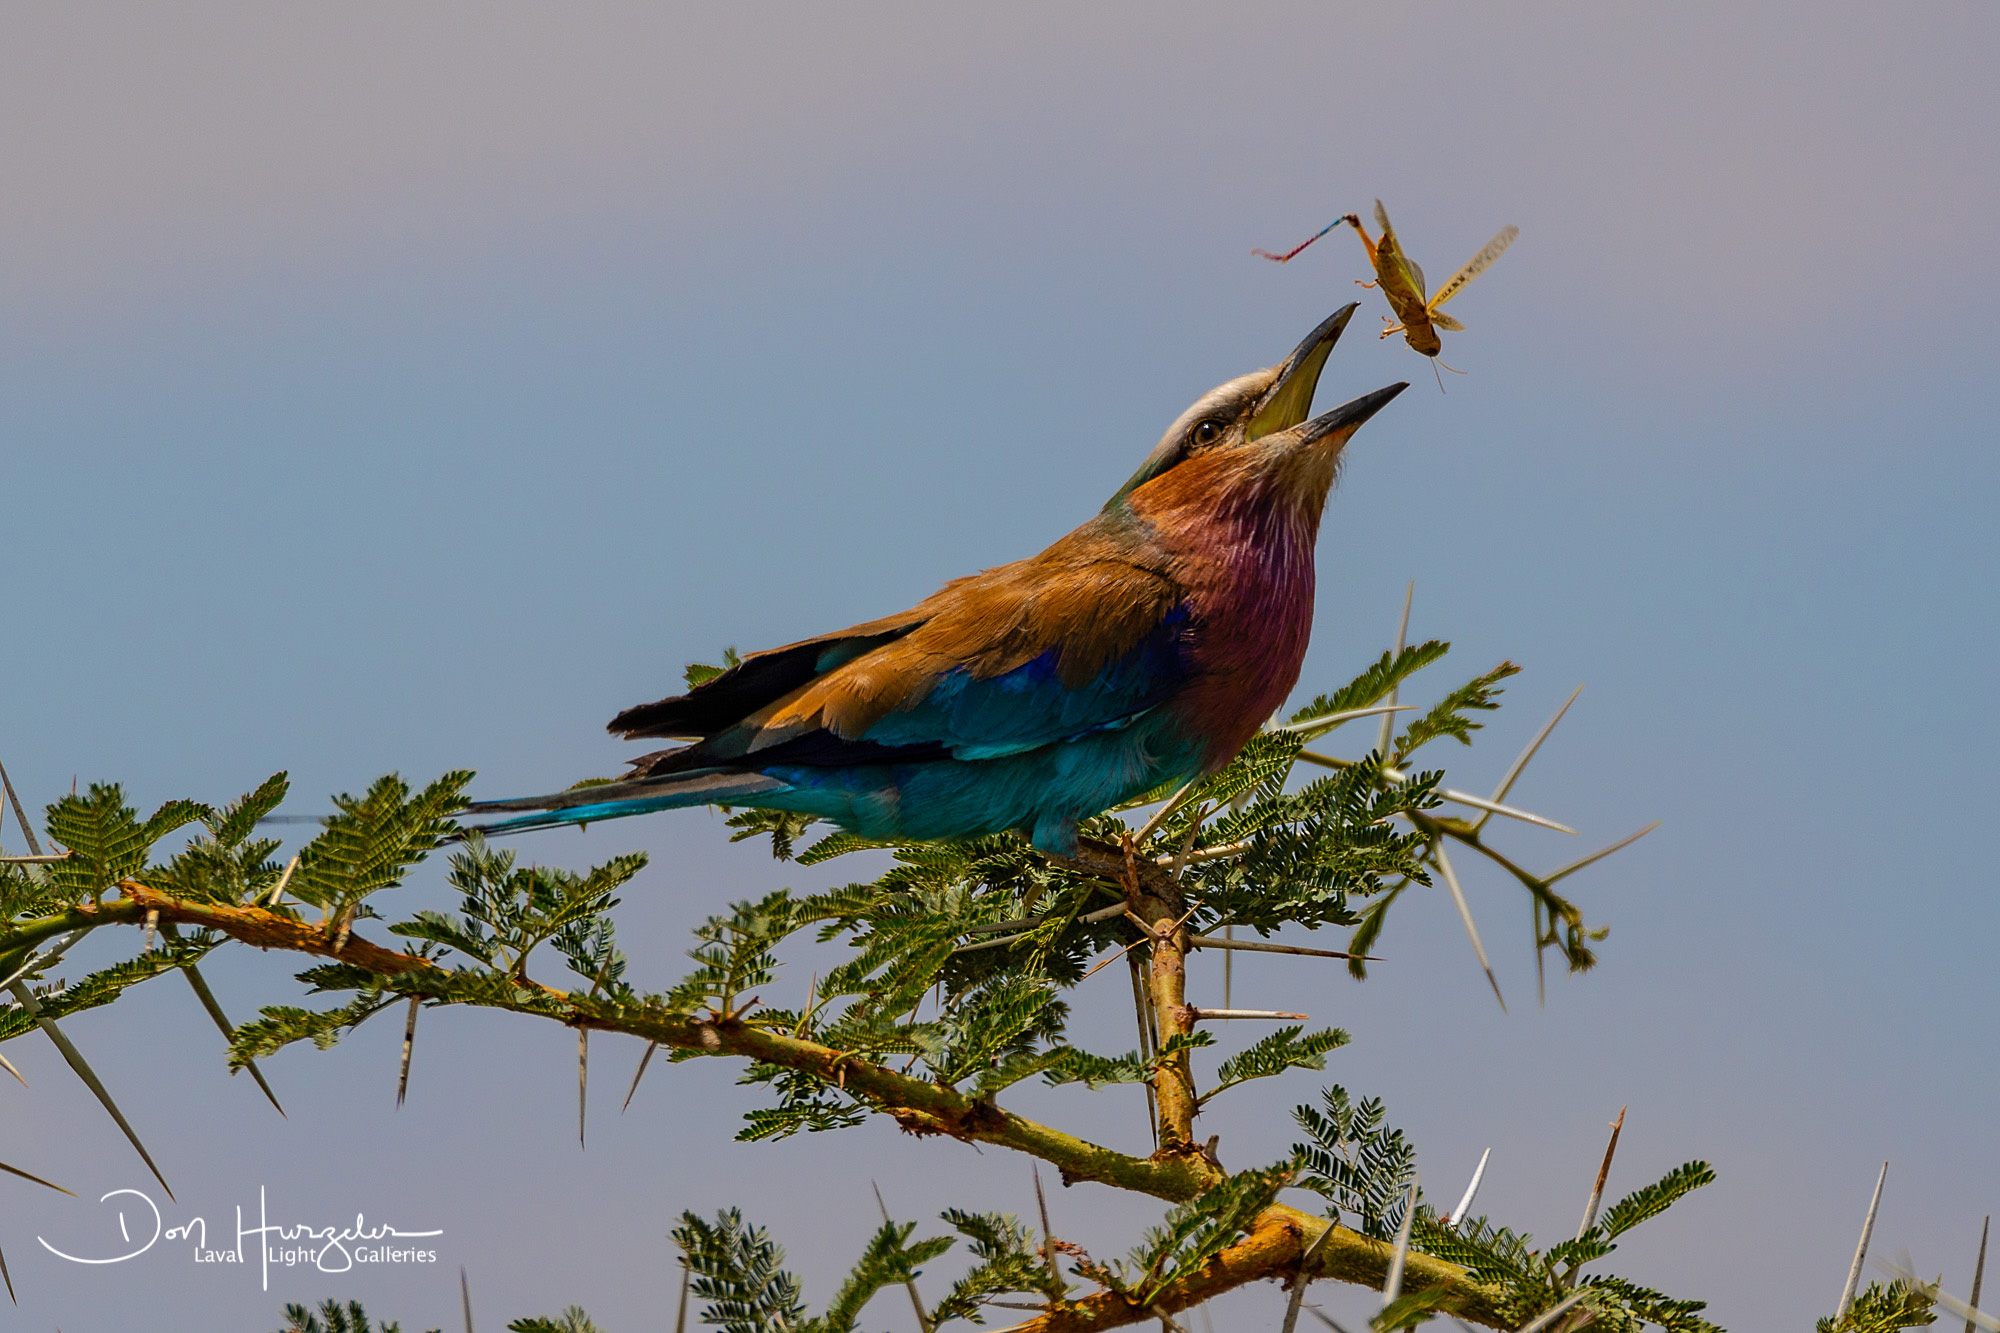 lilac breasted roller catching prey